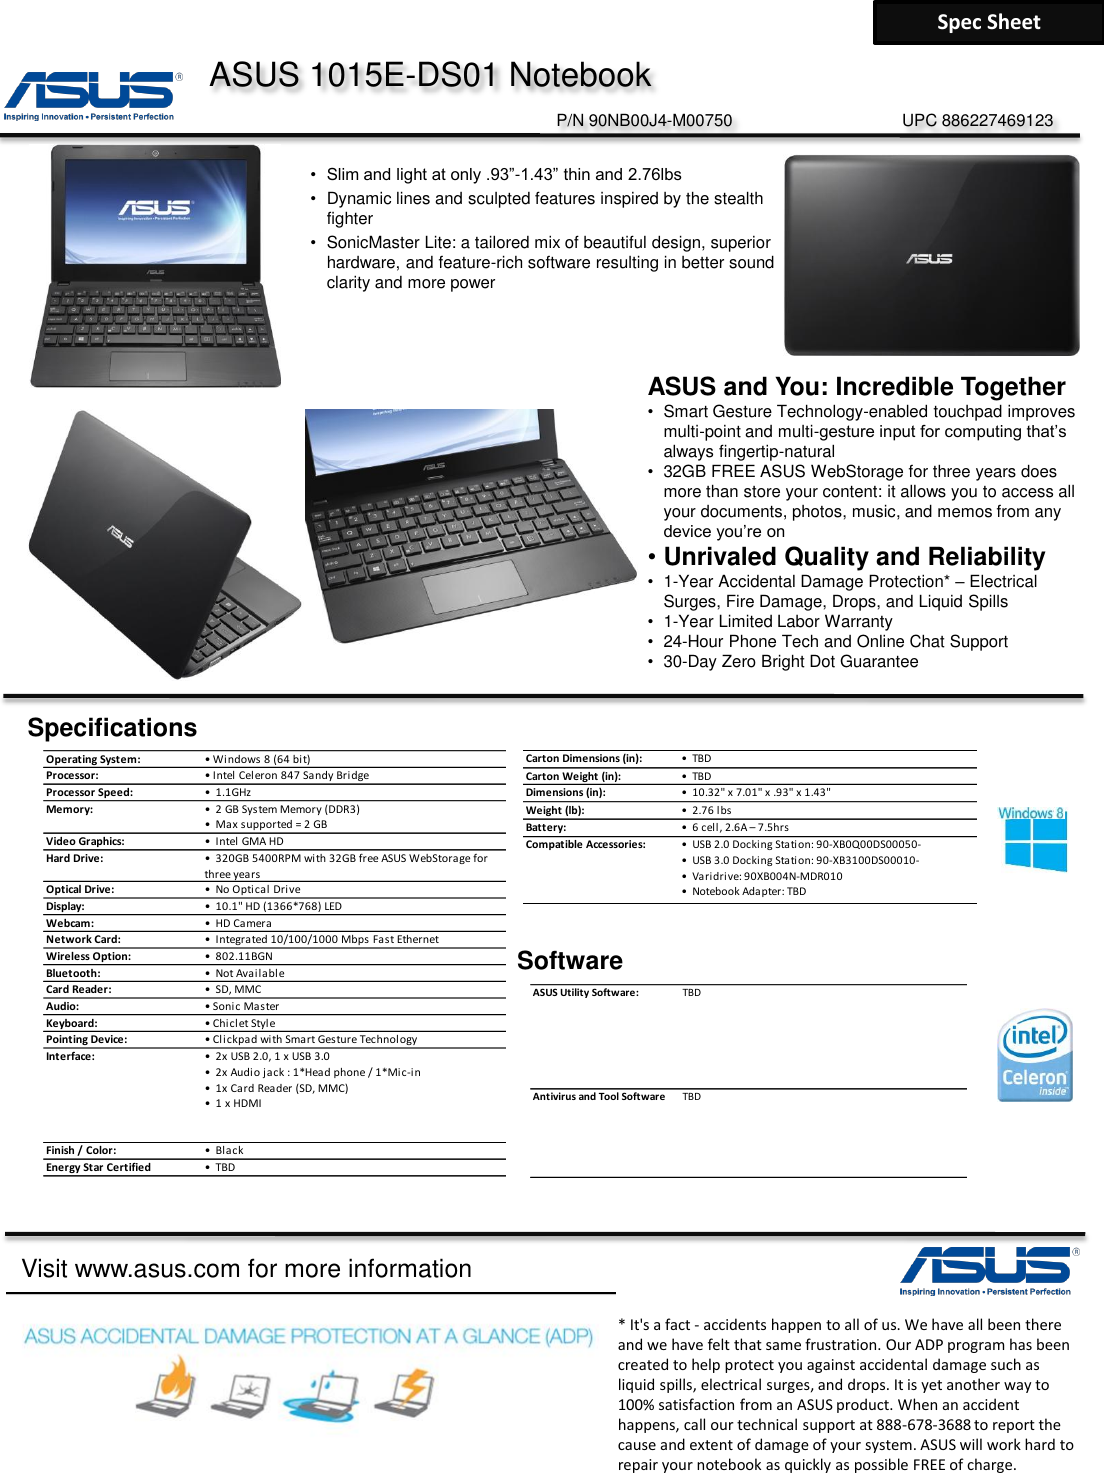 Page 1 of 1 - Asus Asus-Asus-1015E-Ds01-Notebook-1015E-Ds01-Pk-Users-Manual-  1 Asus-asus-1015e-ds01-notebook-1015e-ds01-pk-users-manual